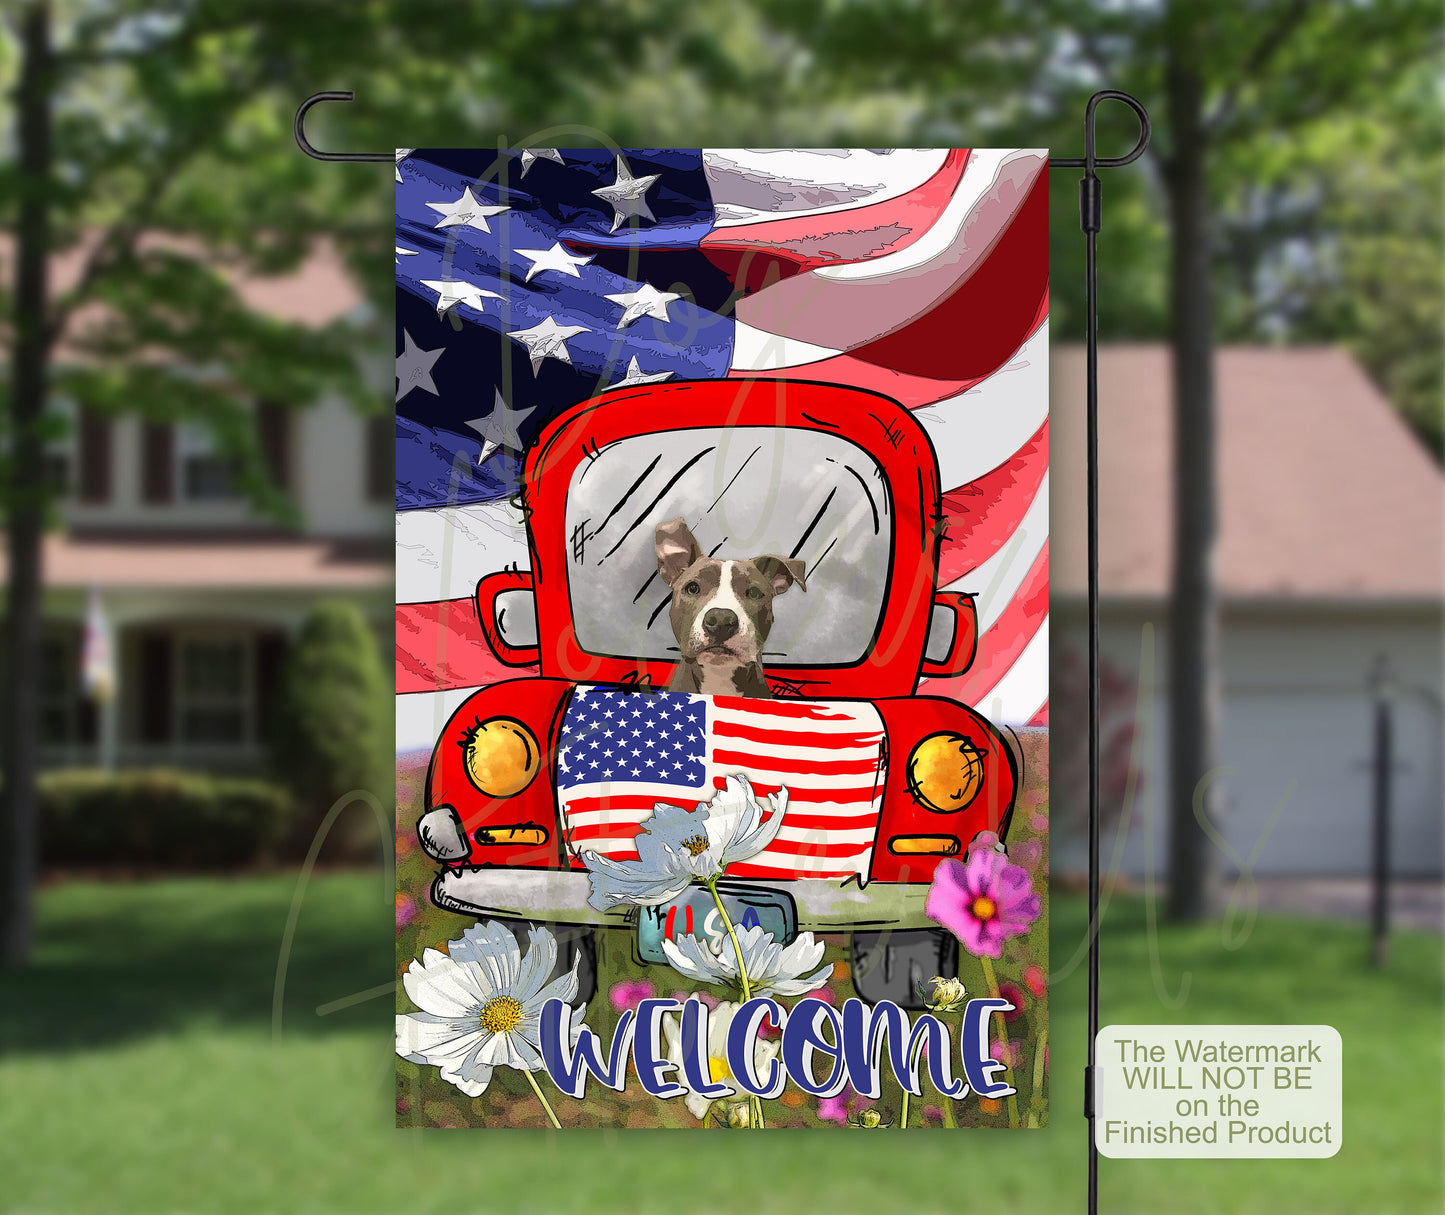 Pit Bull, Pitbull Art, House Flags, American Flag, Patriotic Decor, Outdoor Flag, New Home Gift, Vintage Truck, Daisies Field, Pitbull Mama